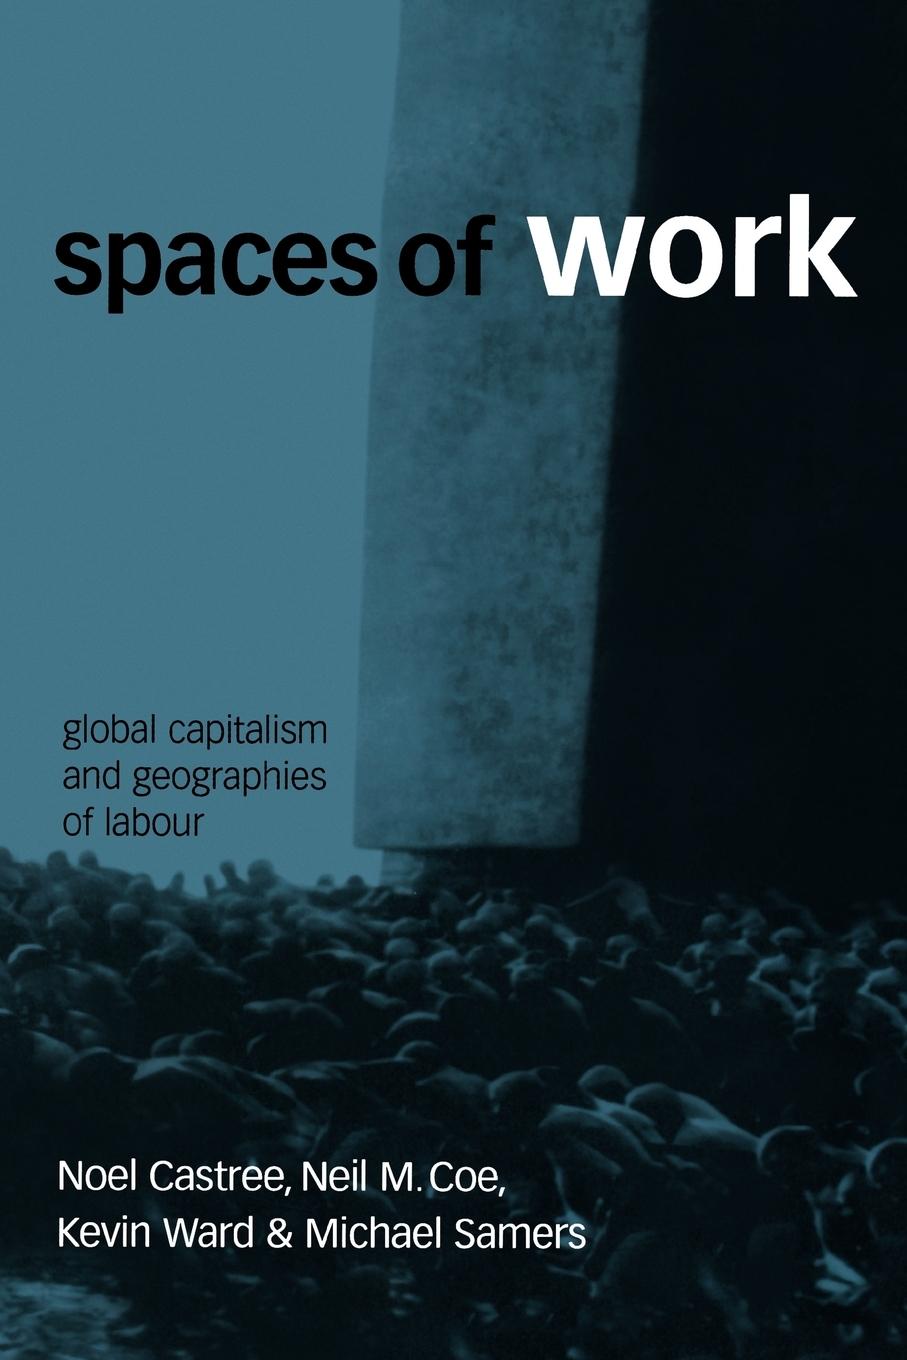 Spaces of Work / Global Capitalism and Geographies of Labour / Kevin Ward / Taschenbuch / Paperback / Englisch / 2003 / Sage Publications / EAN 9780761972174 - Ward, Kevin